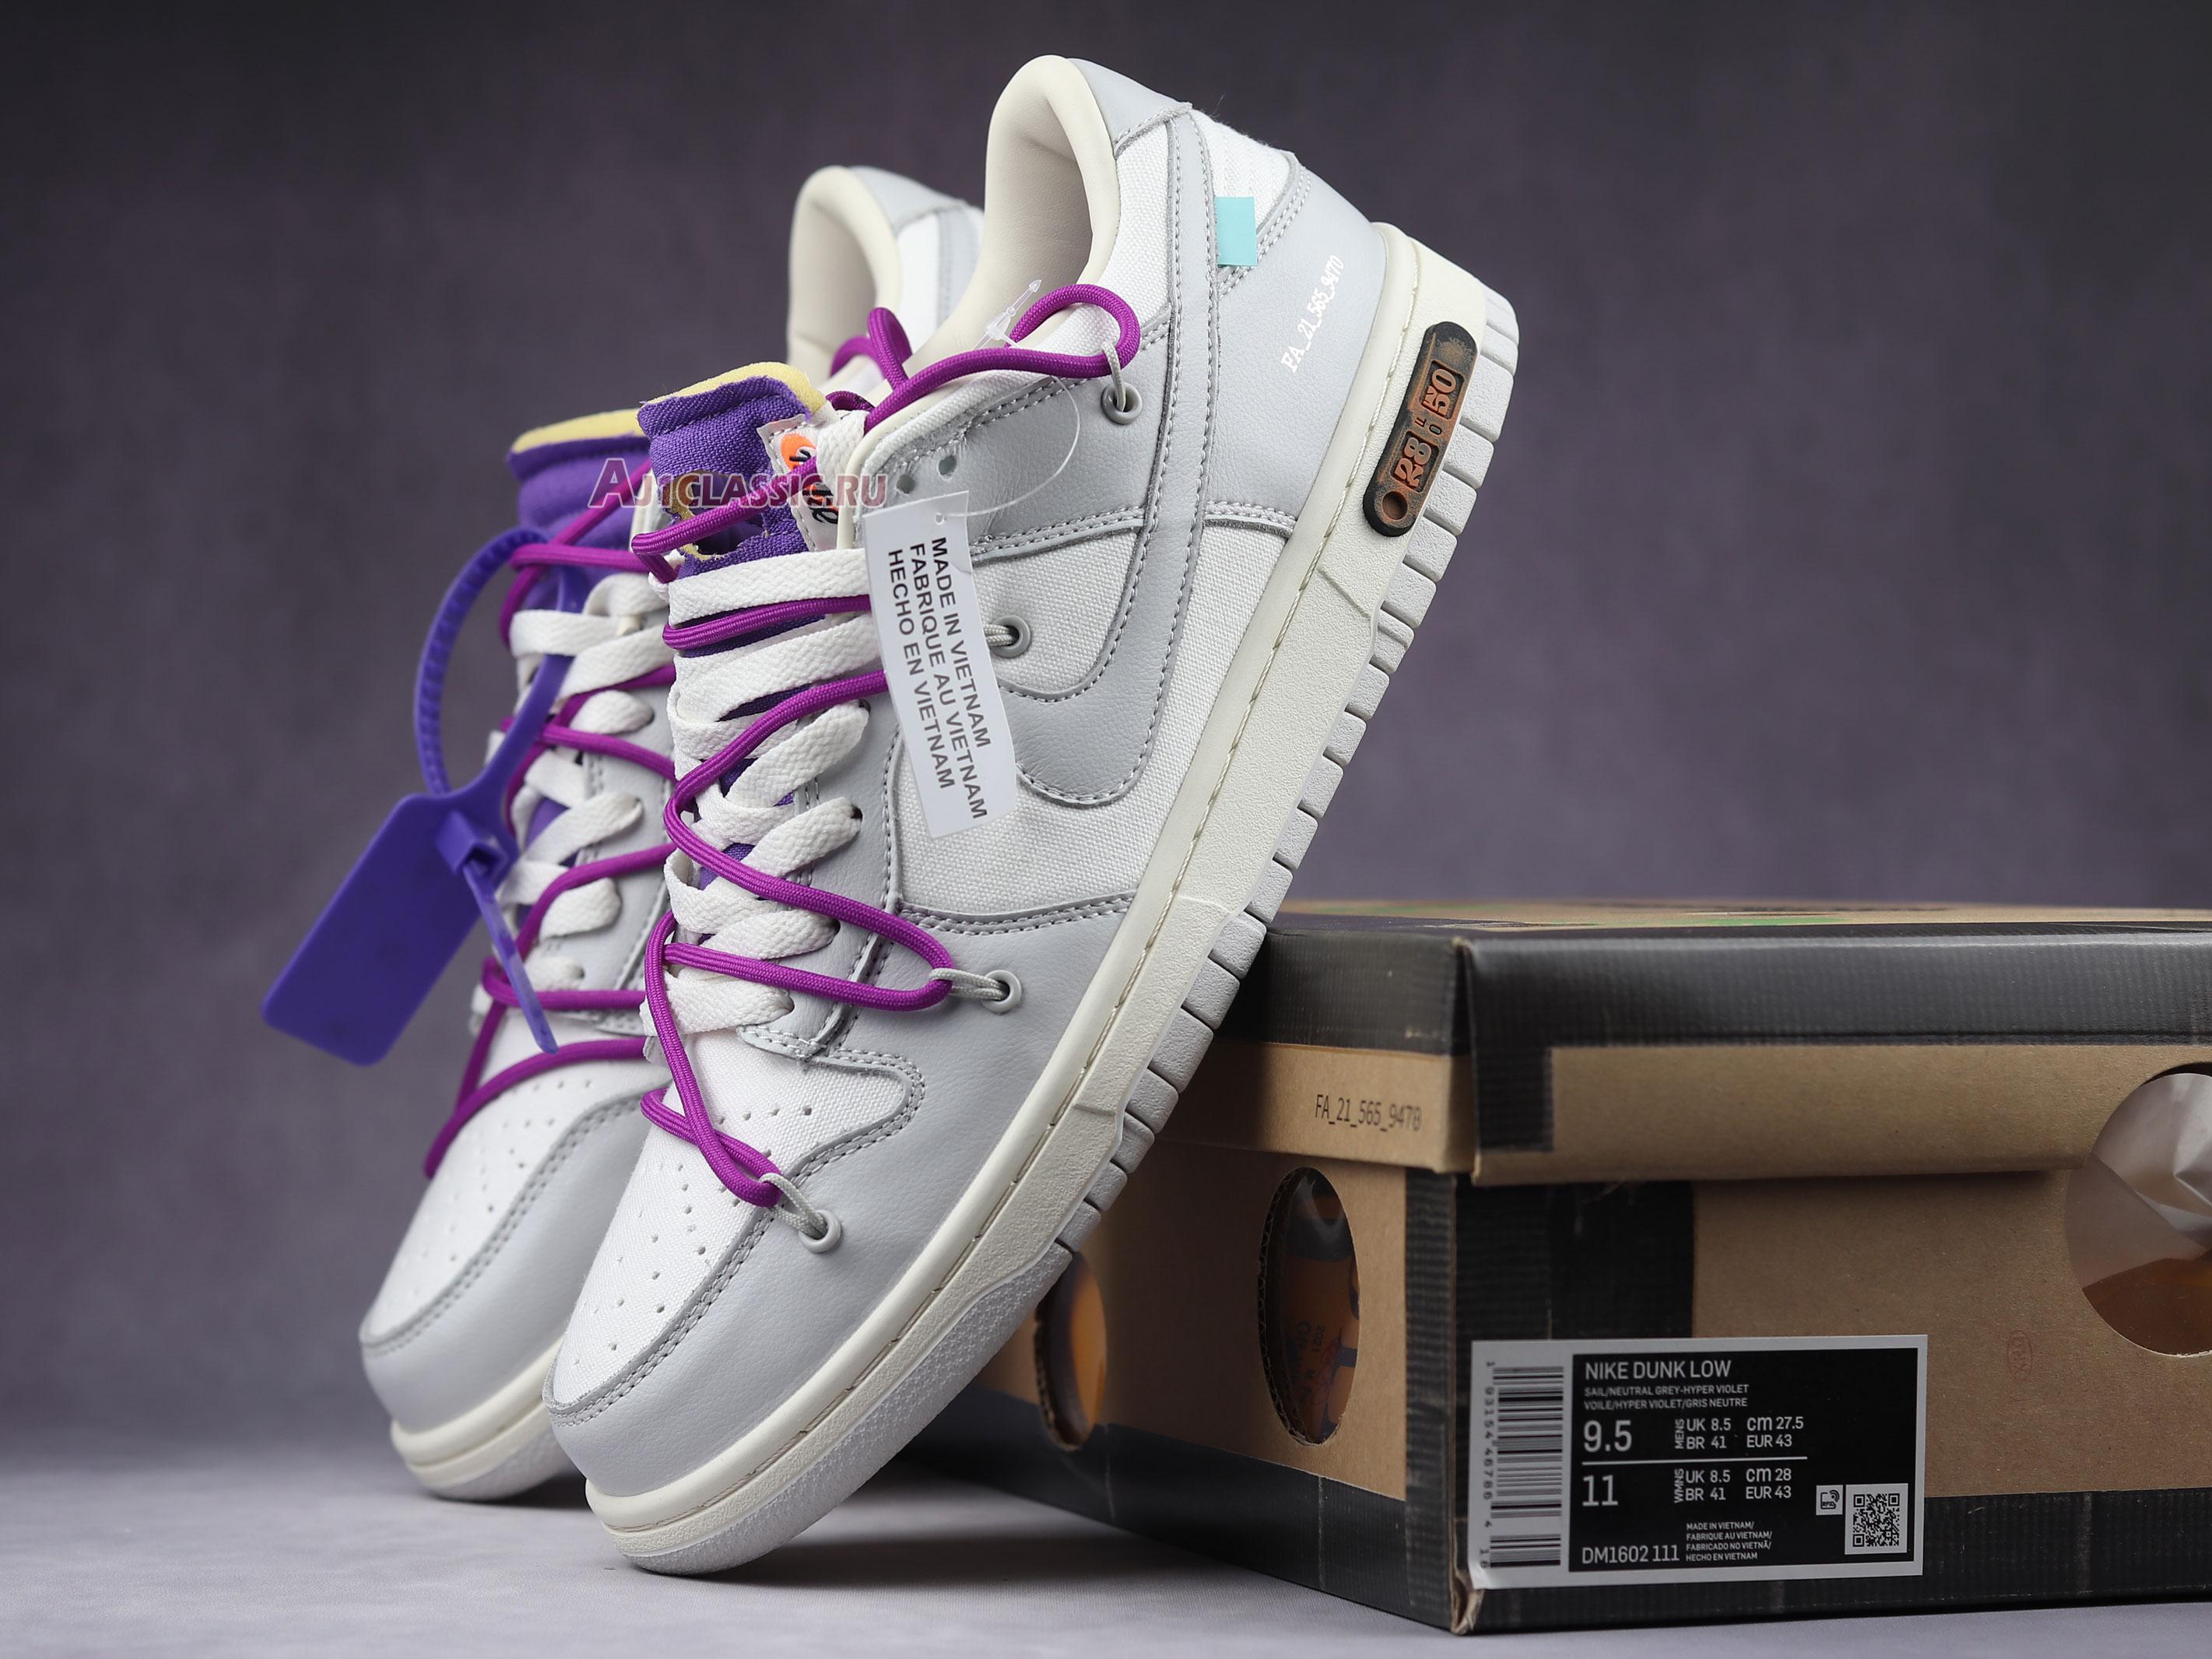 Off-White x Nike Dunk Low "Lot 28 of 50" DM1602-111